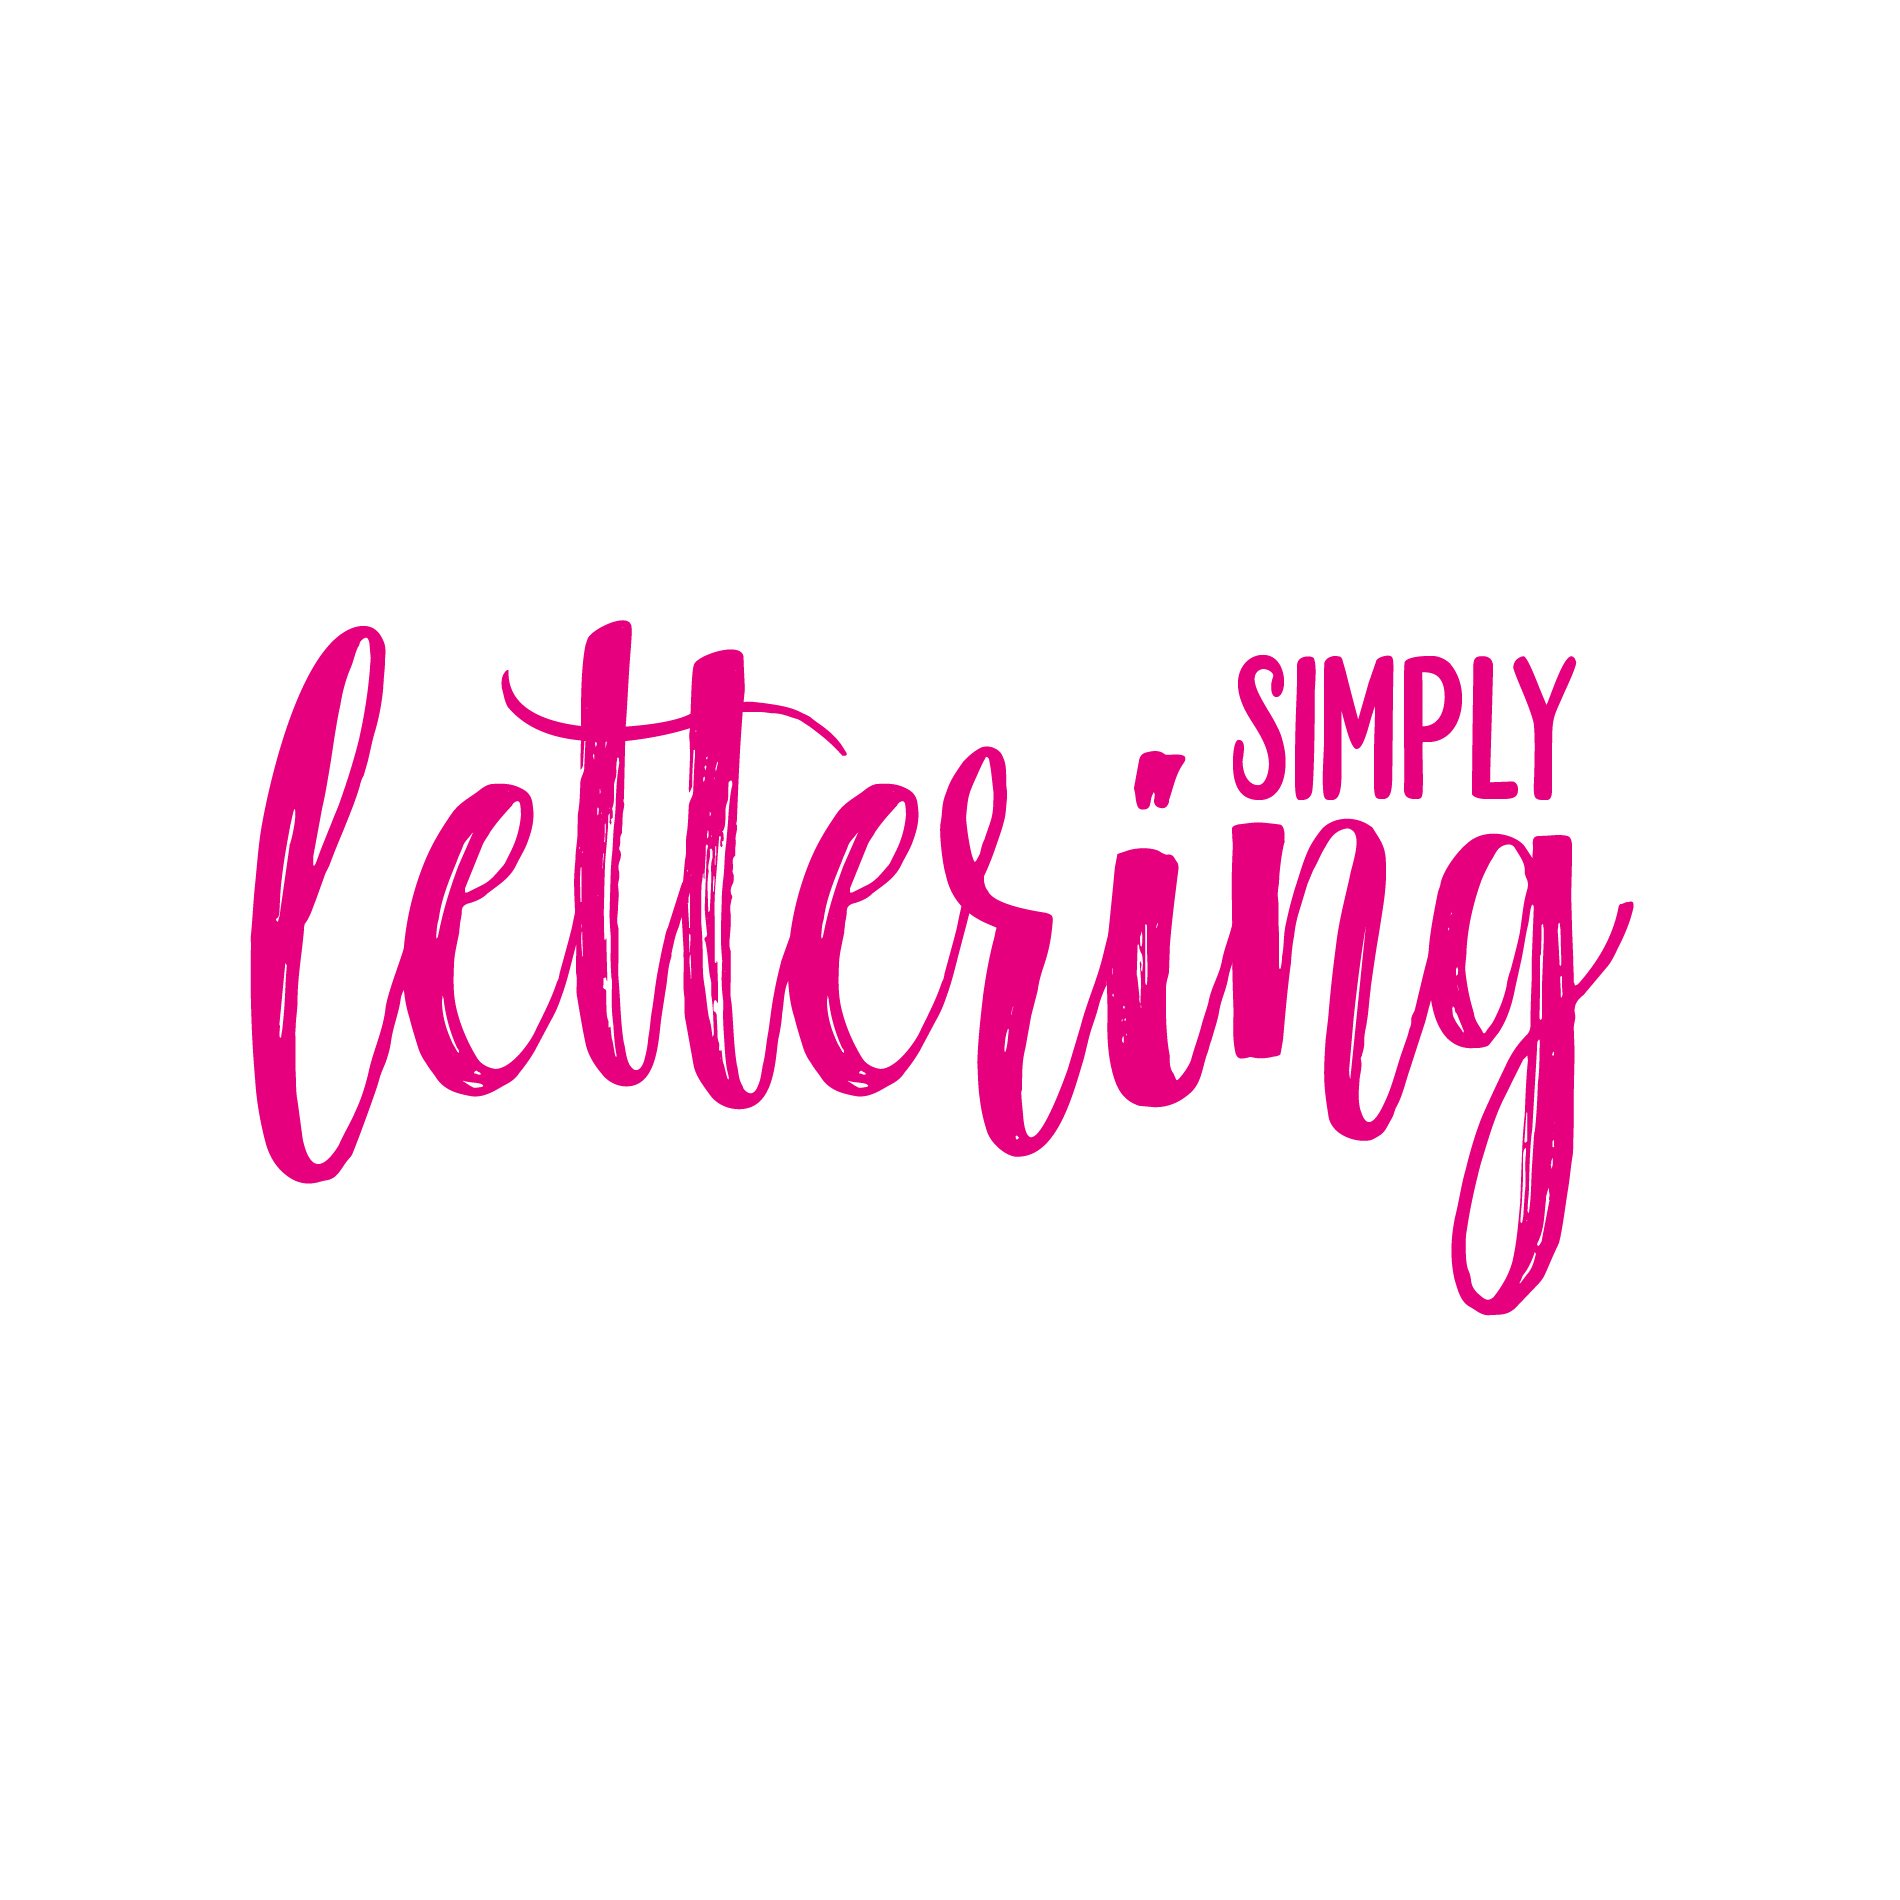 Simply Lettering is a brand-new UK magazine dedicated to lettering and modern calligraphy. In stores this July